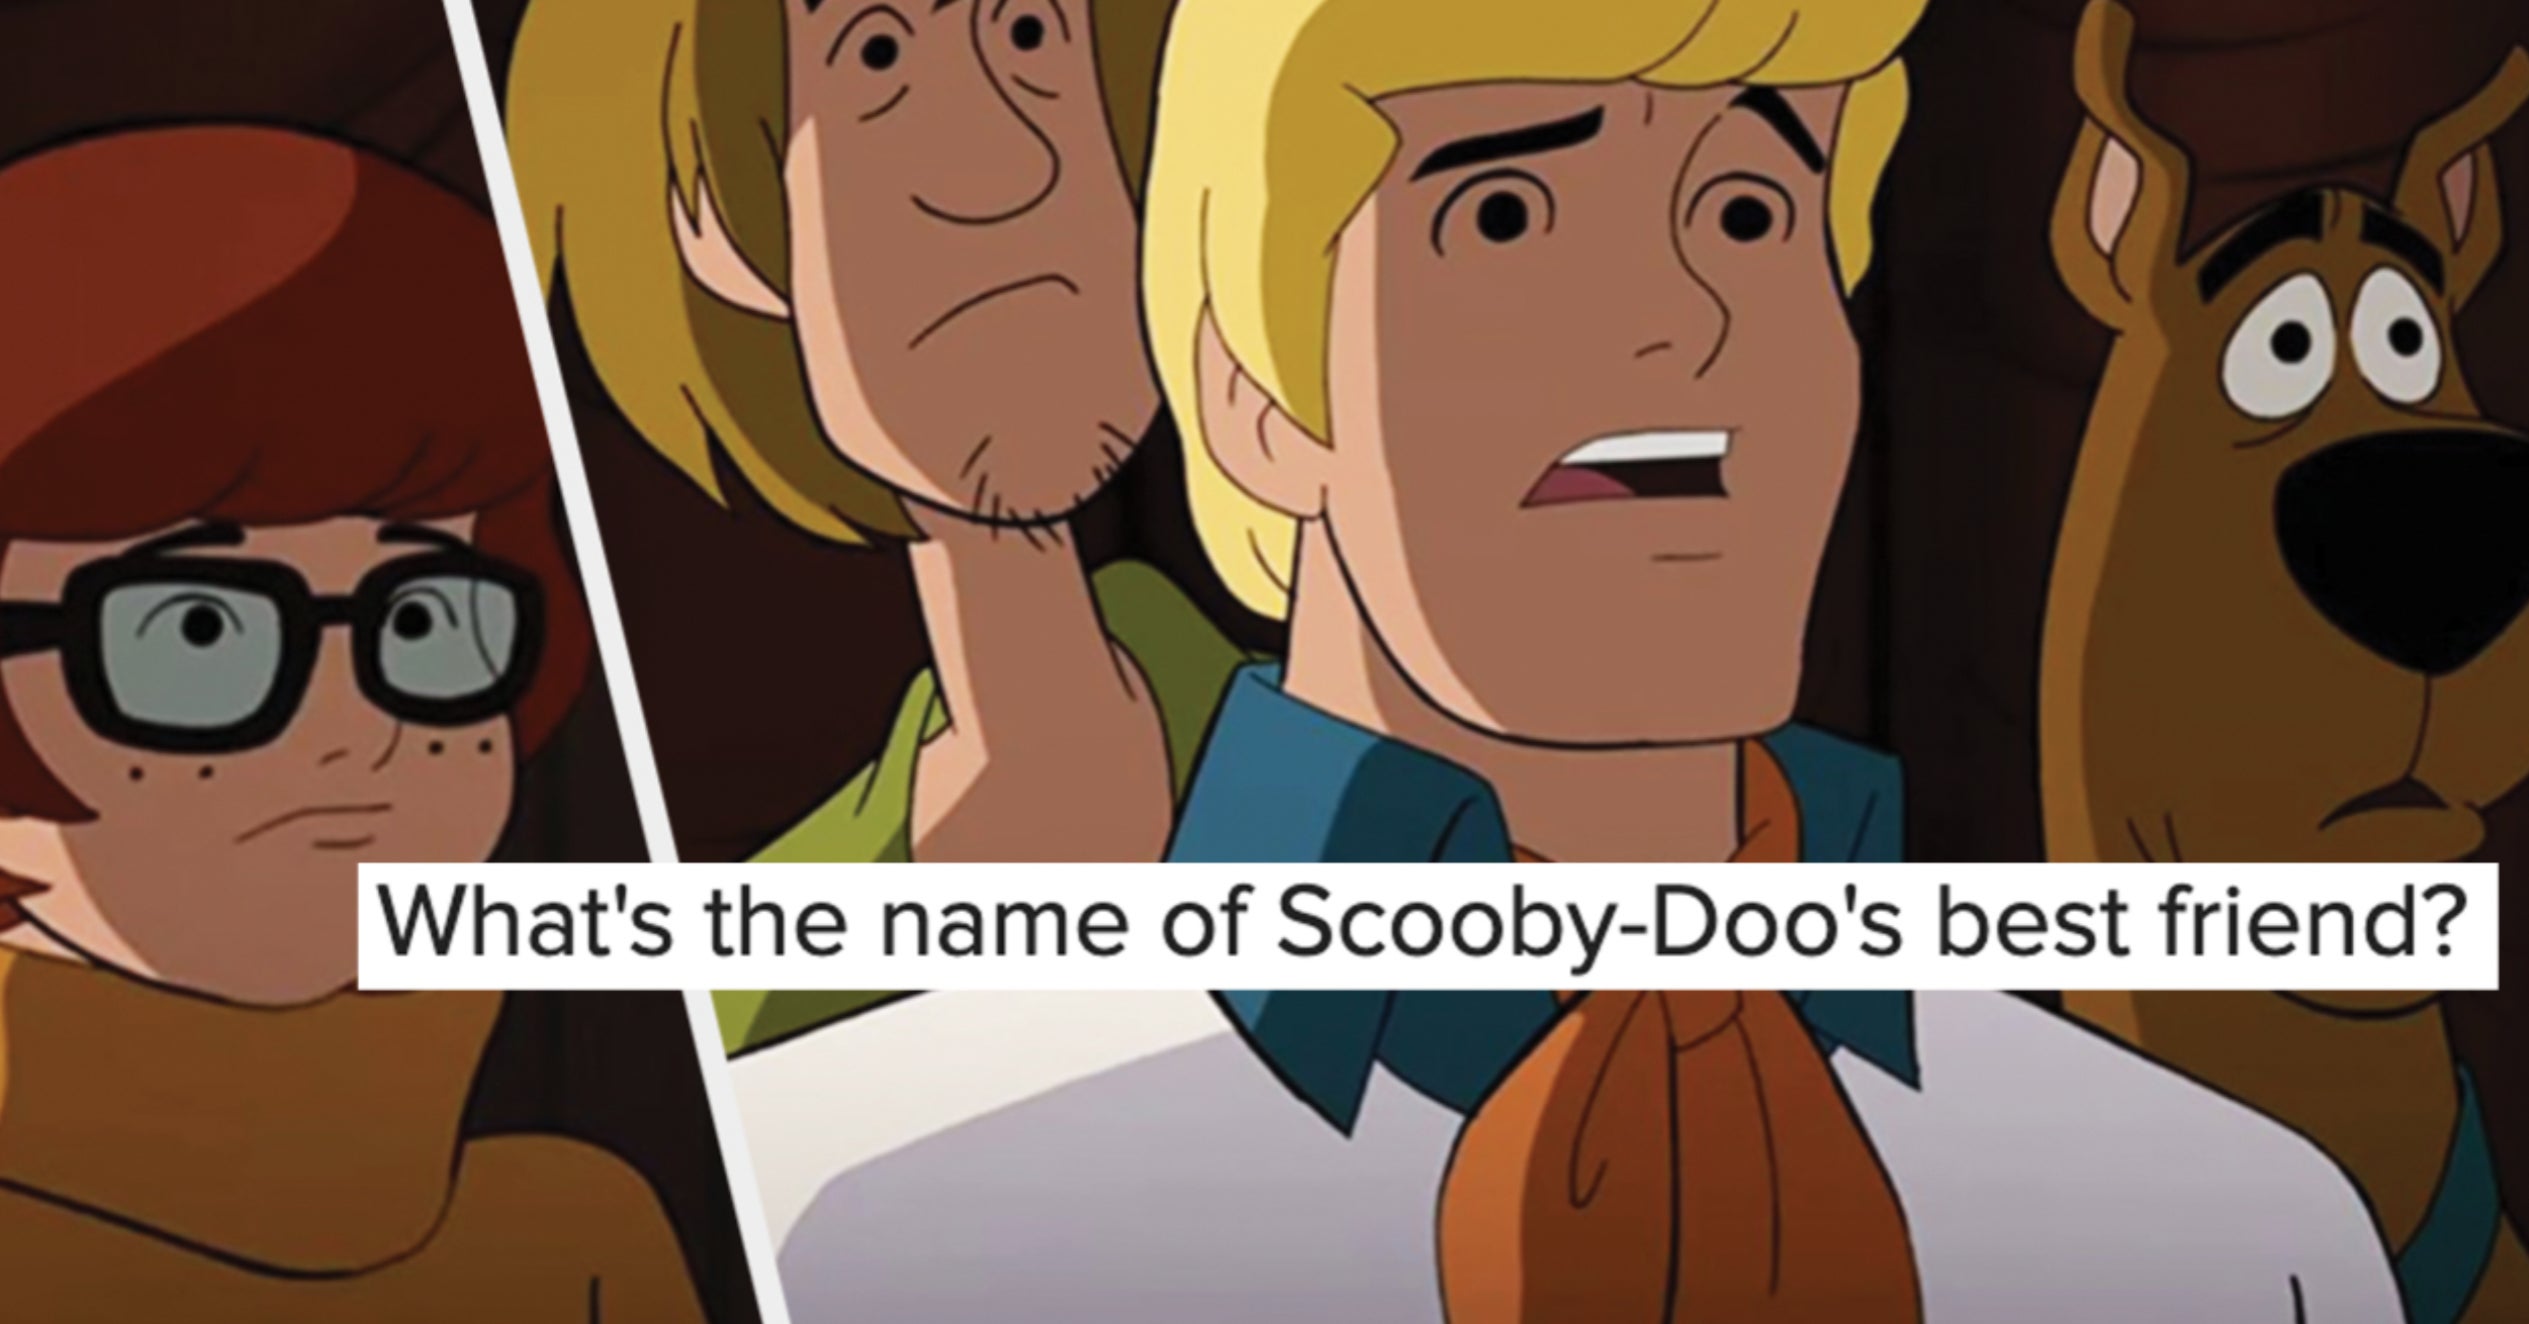 Can You Ace This 2000s Cartoon Trivia Quiz?